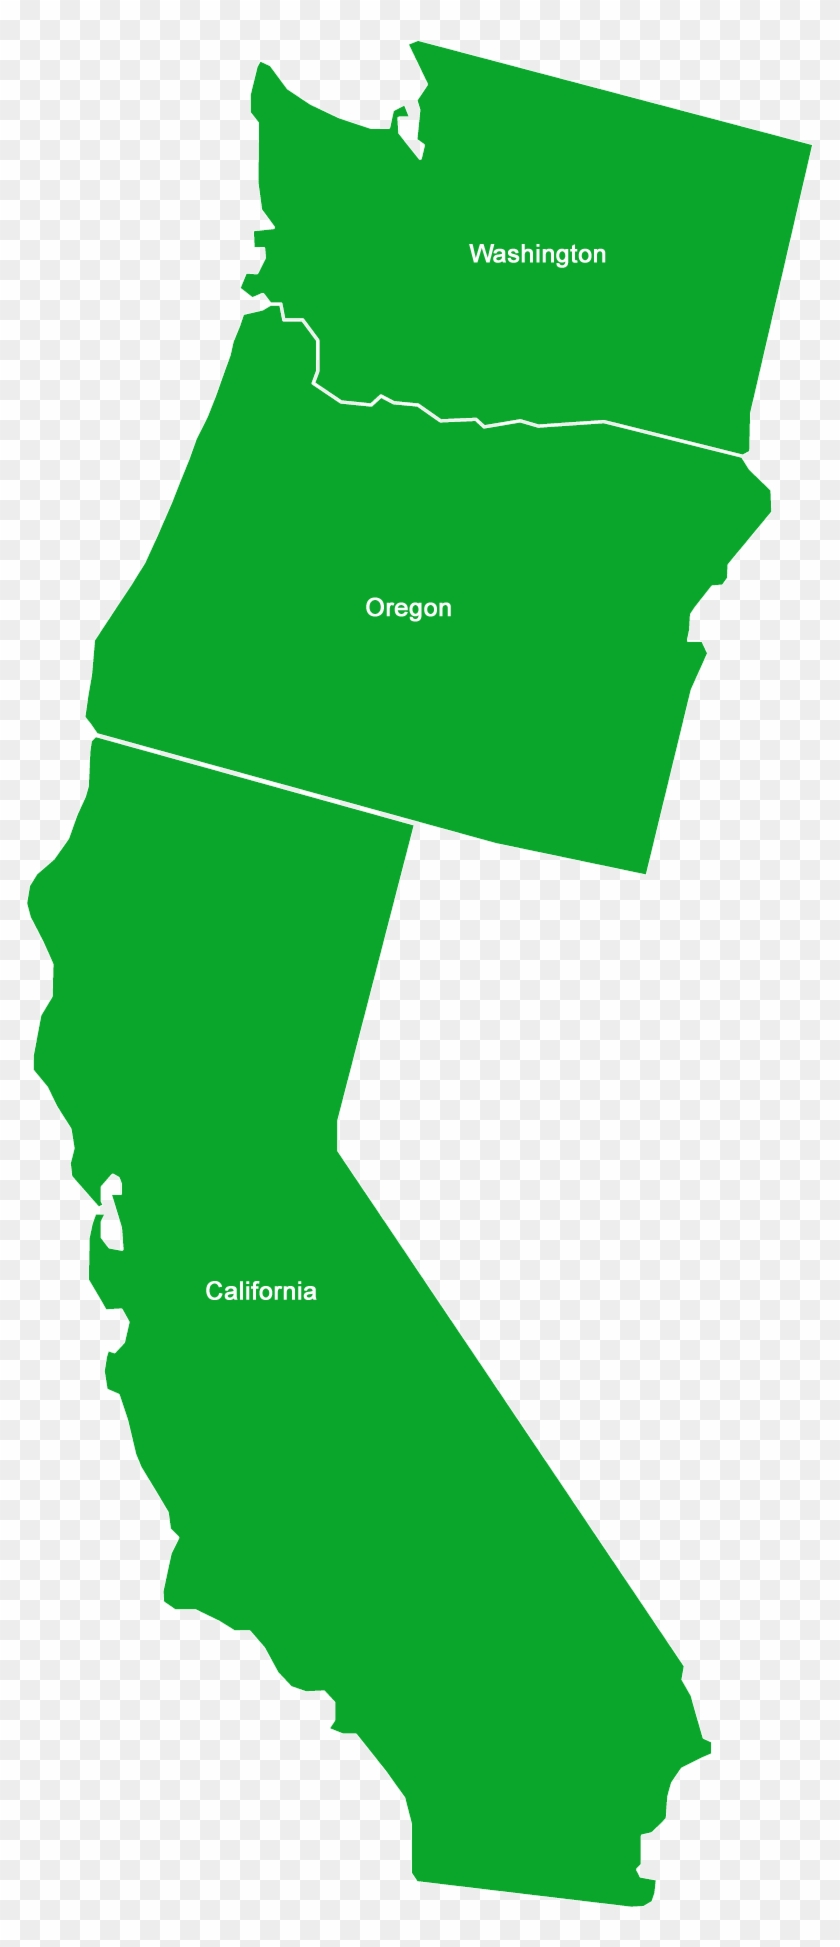 Image Result For Outline Of Washington Oregon And California